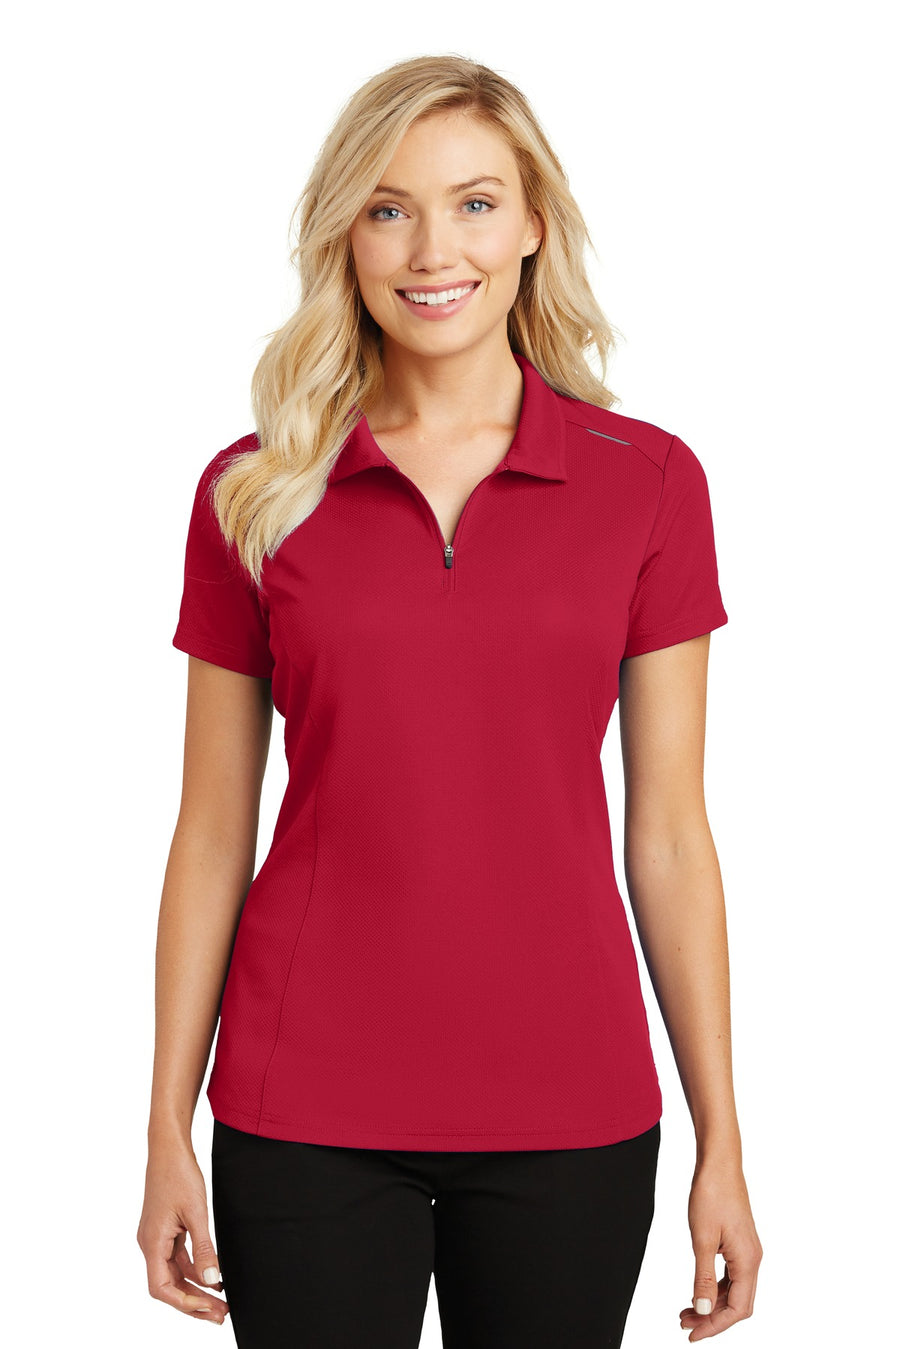 Port Authority Pinpoint Mesh Zip Polo.